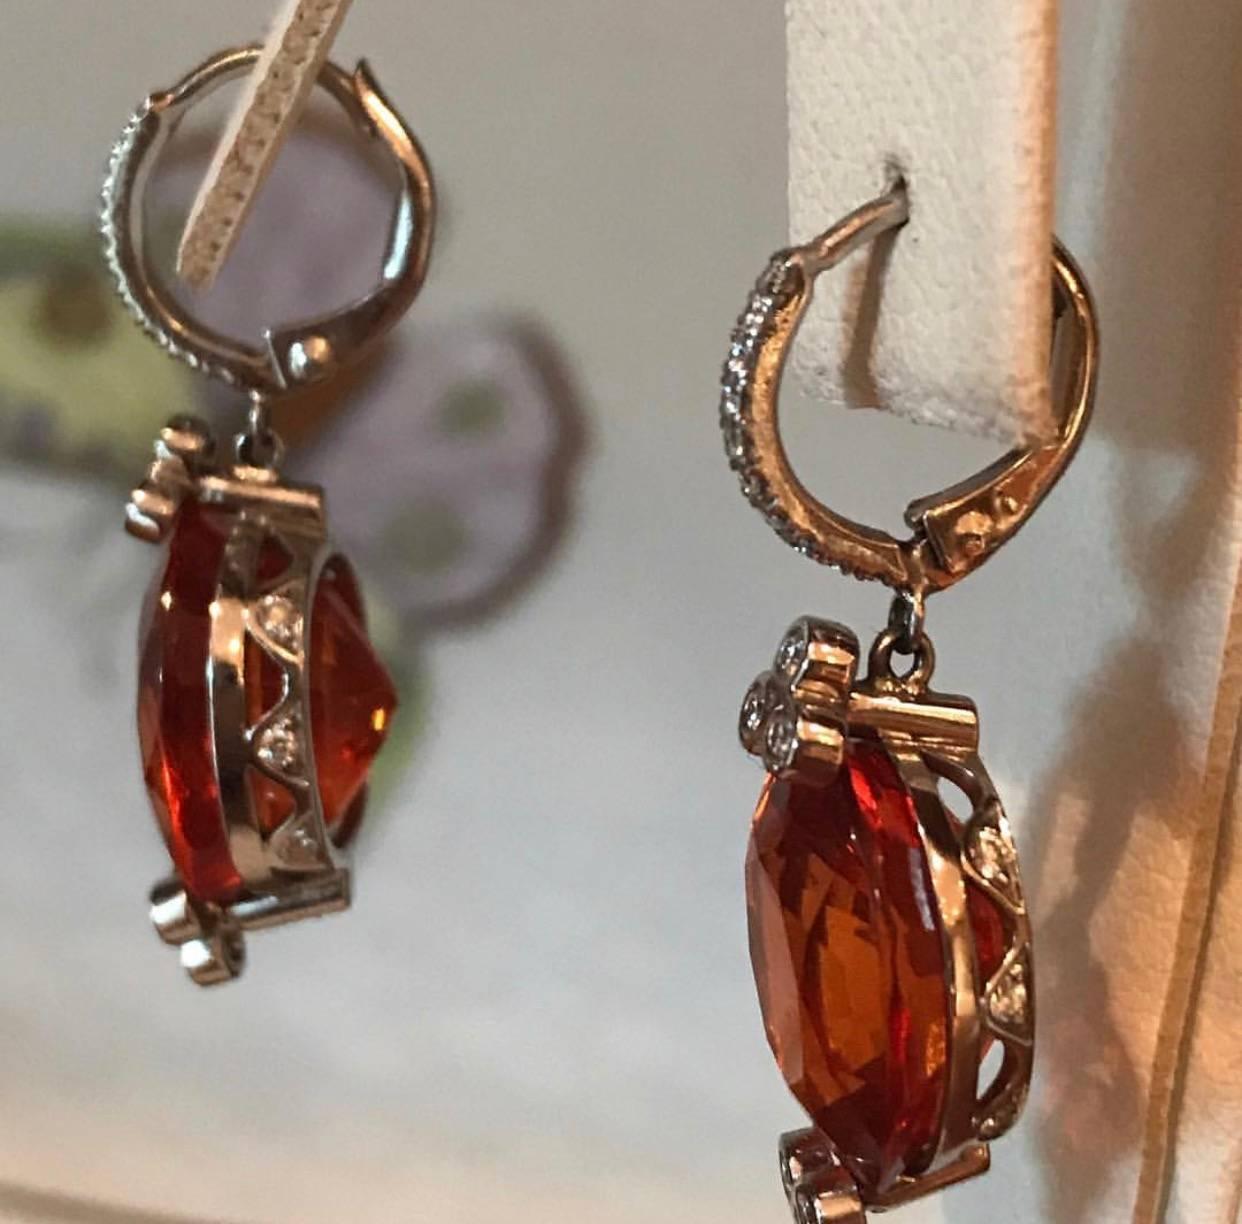 The unique Mandarine Garnet earrings in 18 K white Gold have a Diamond accent, French Backs and Side Detail
2 Oval Mandarin Garnets 23.81 CT's Total Weight
Diamonds approximately .50 CT's
Made in 18 K White Gold
one of a kind, made in NYC